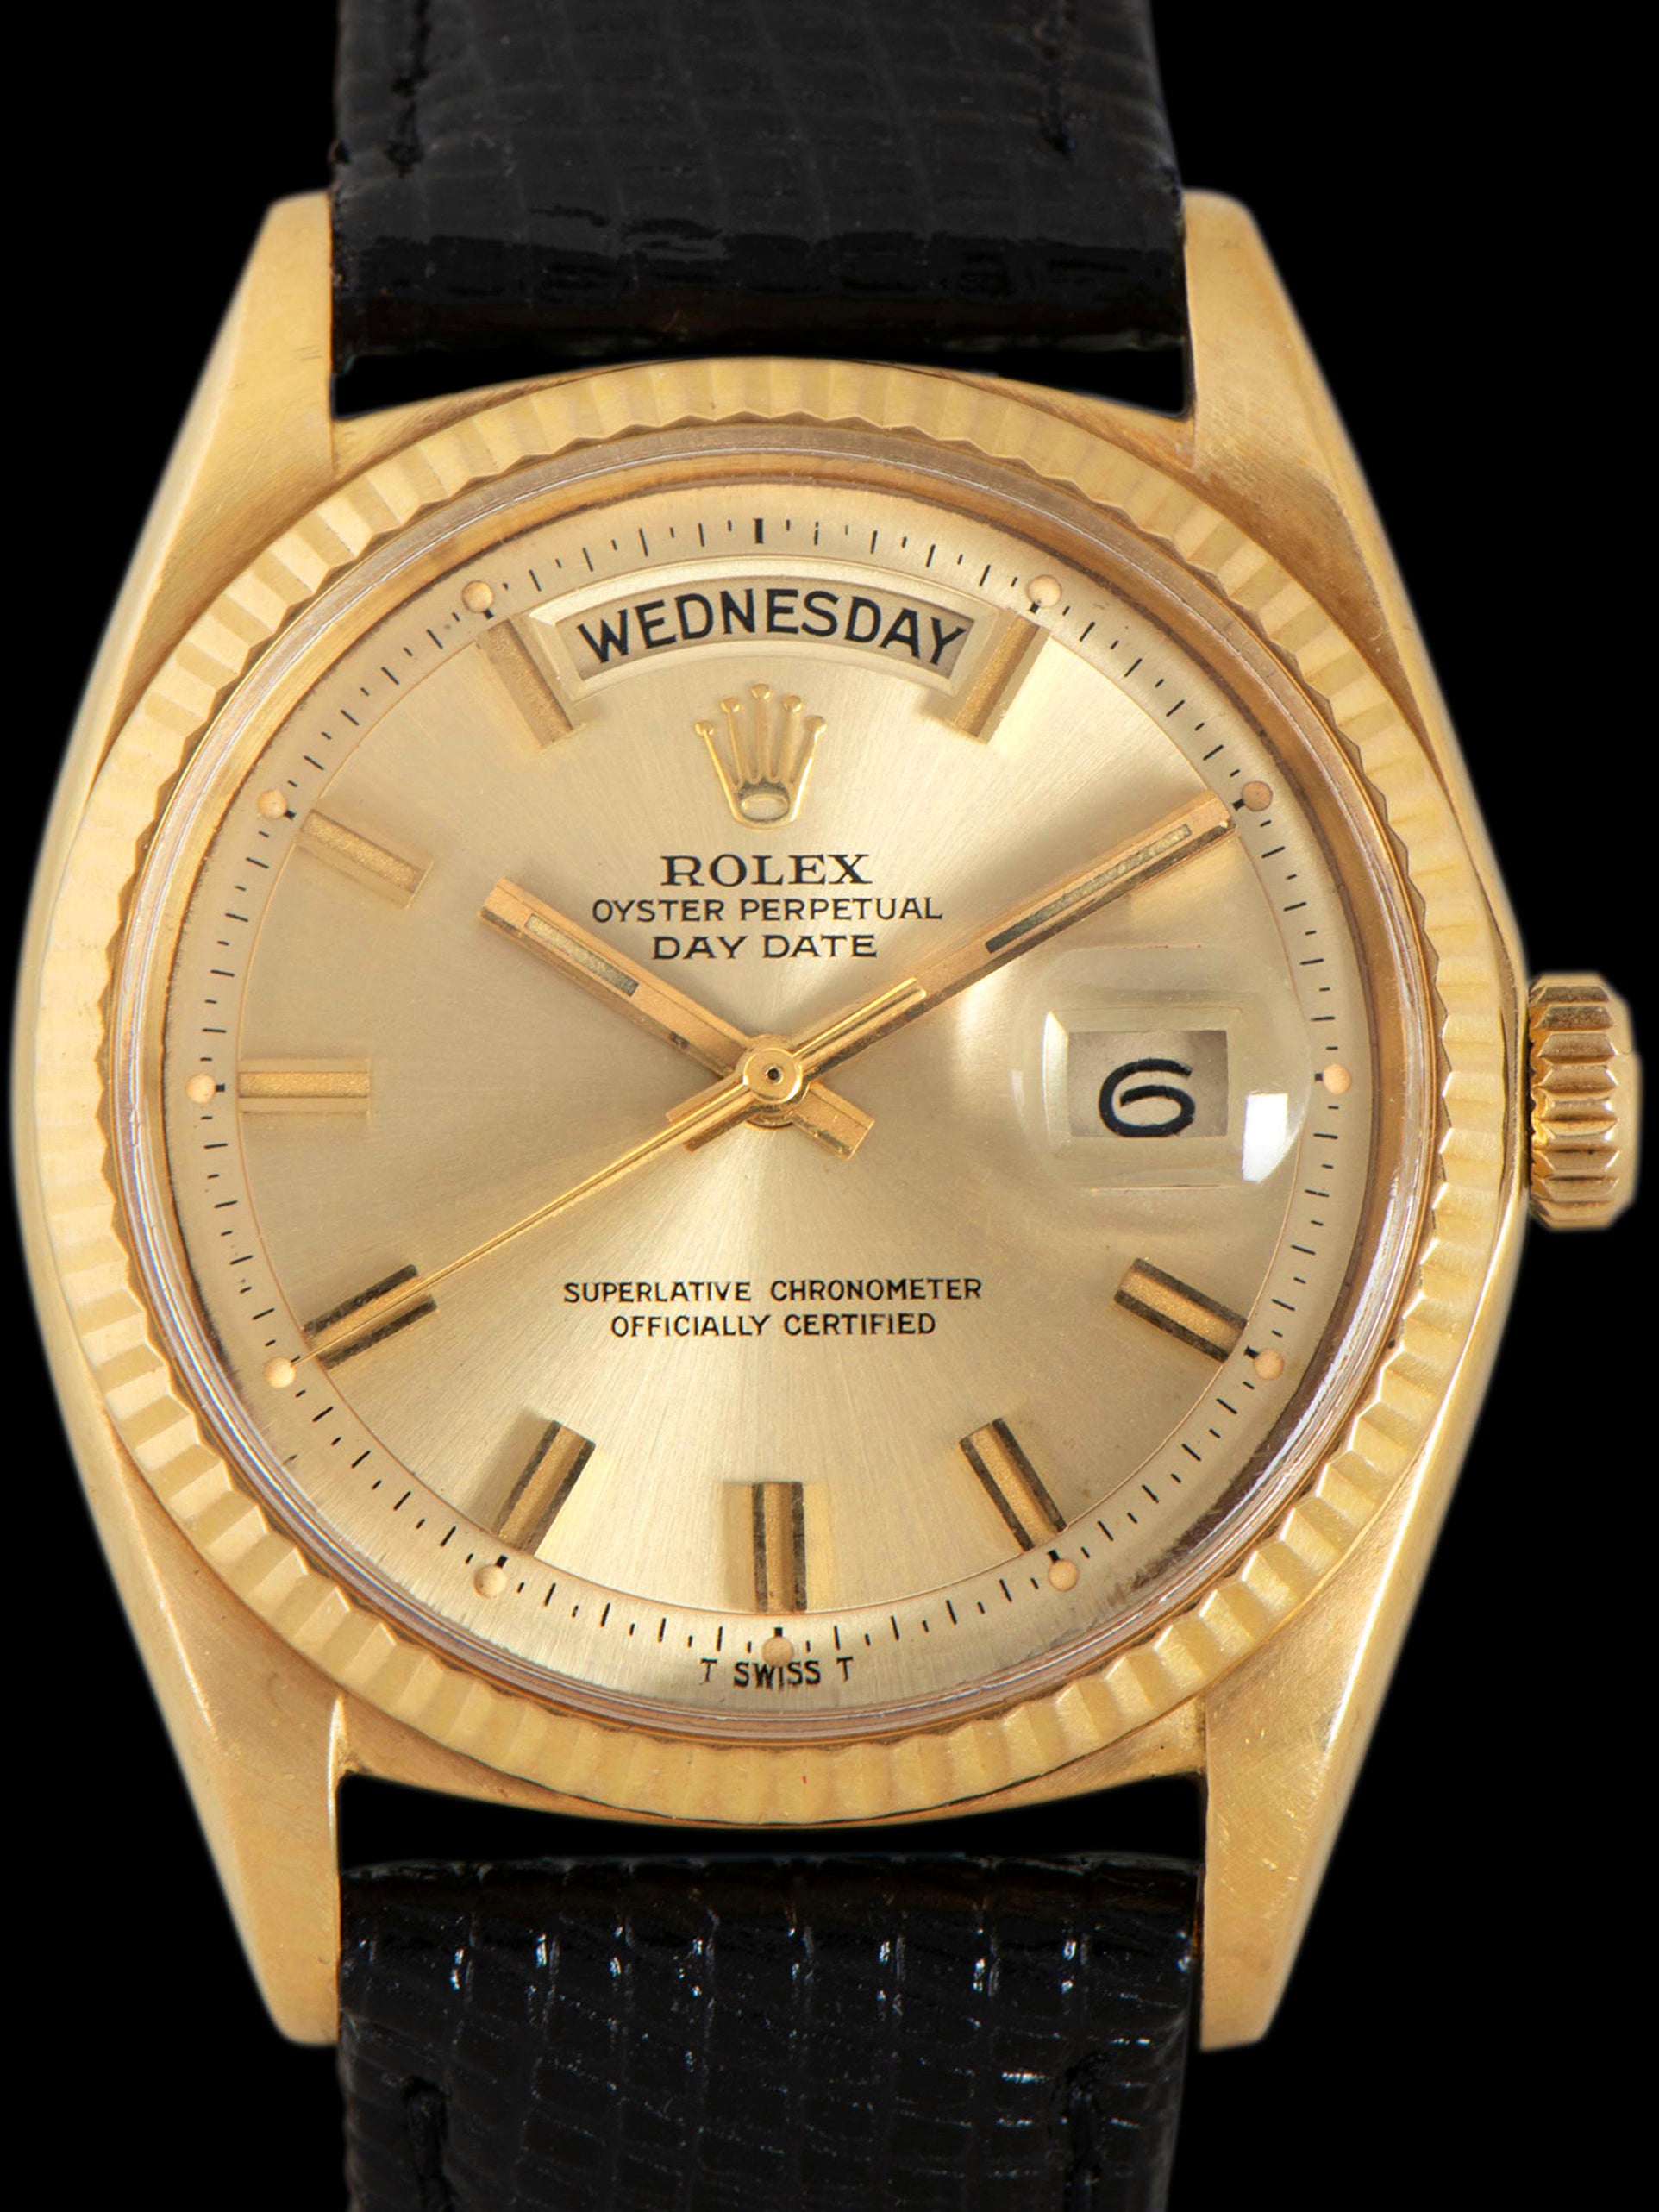 1969 Rolex Day-Date 18K YG (Ref. 1803) Champagne "Wide Boy" Dial W/ Double Punched Papers & Original Sales Receipt